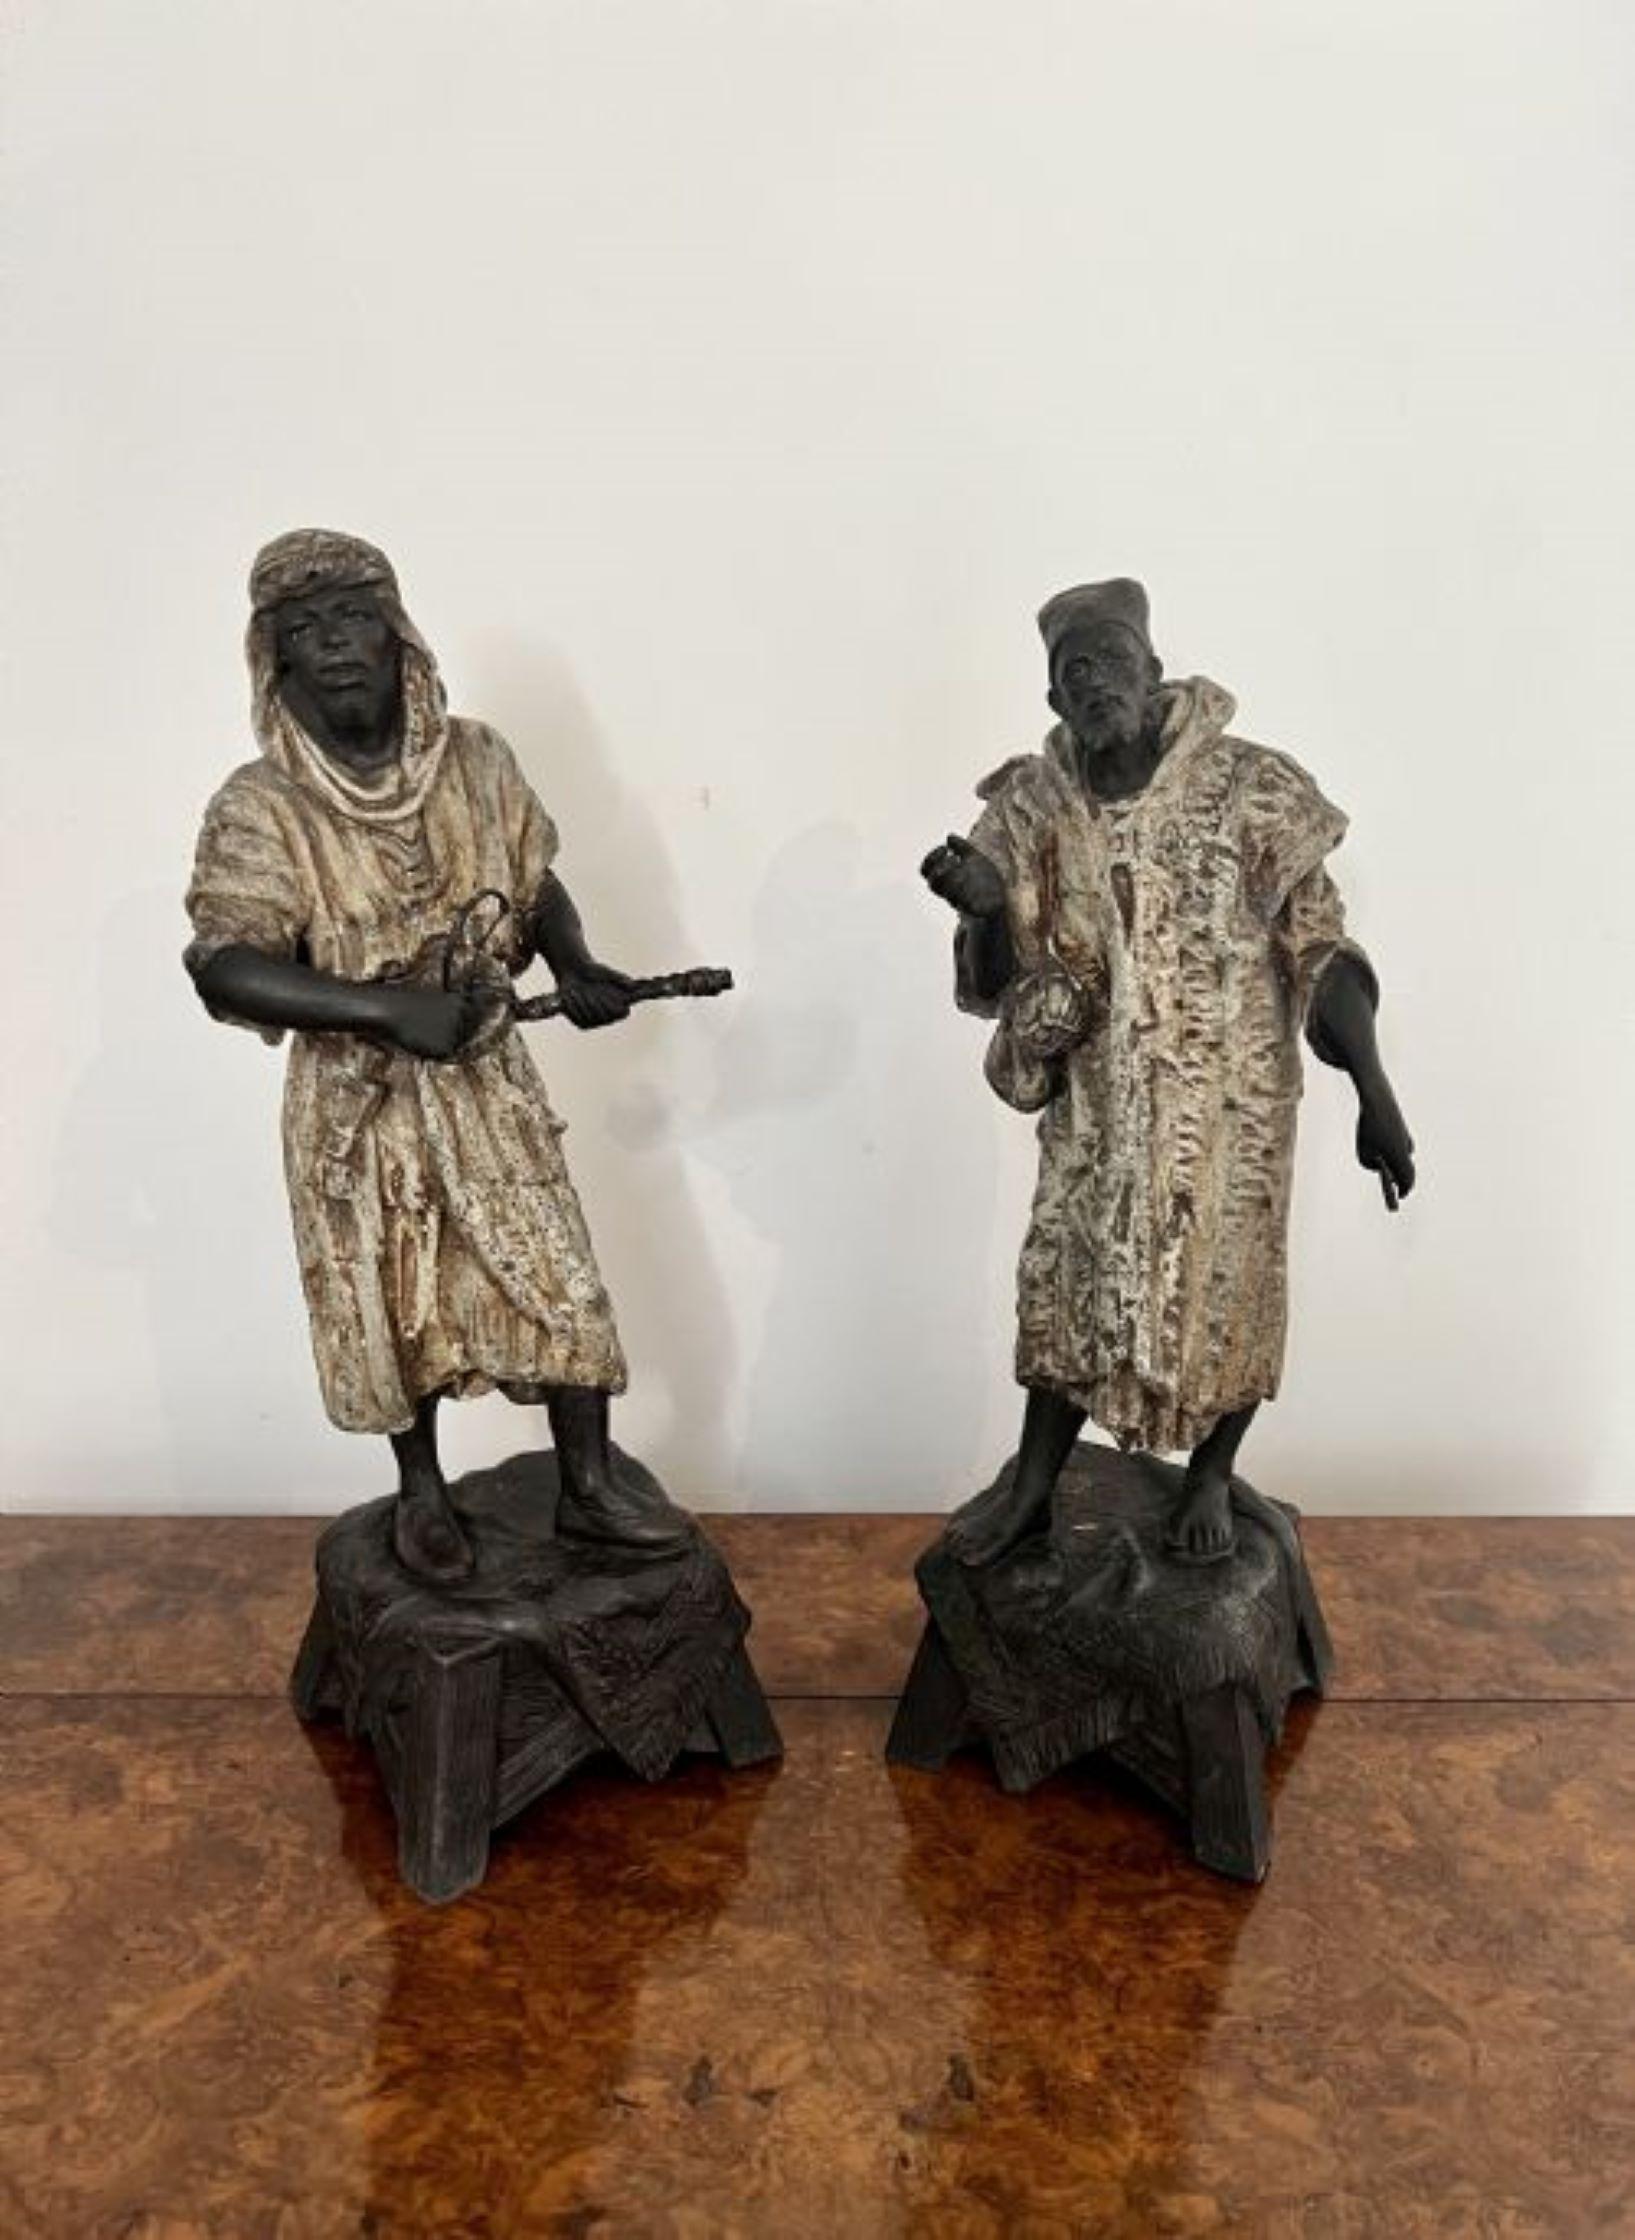 Unusual pair of antique Victorian spelter figures depicting two males in traditional moorish robes and headdresses standing on ornate square bases.